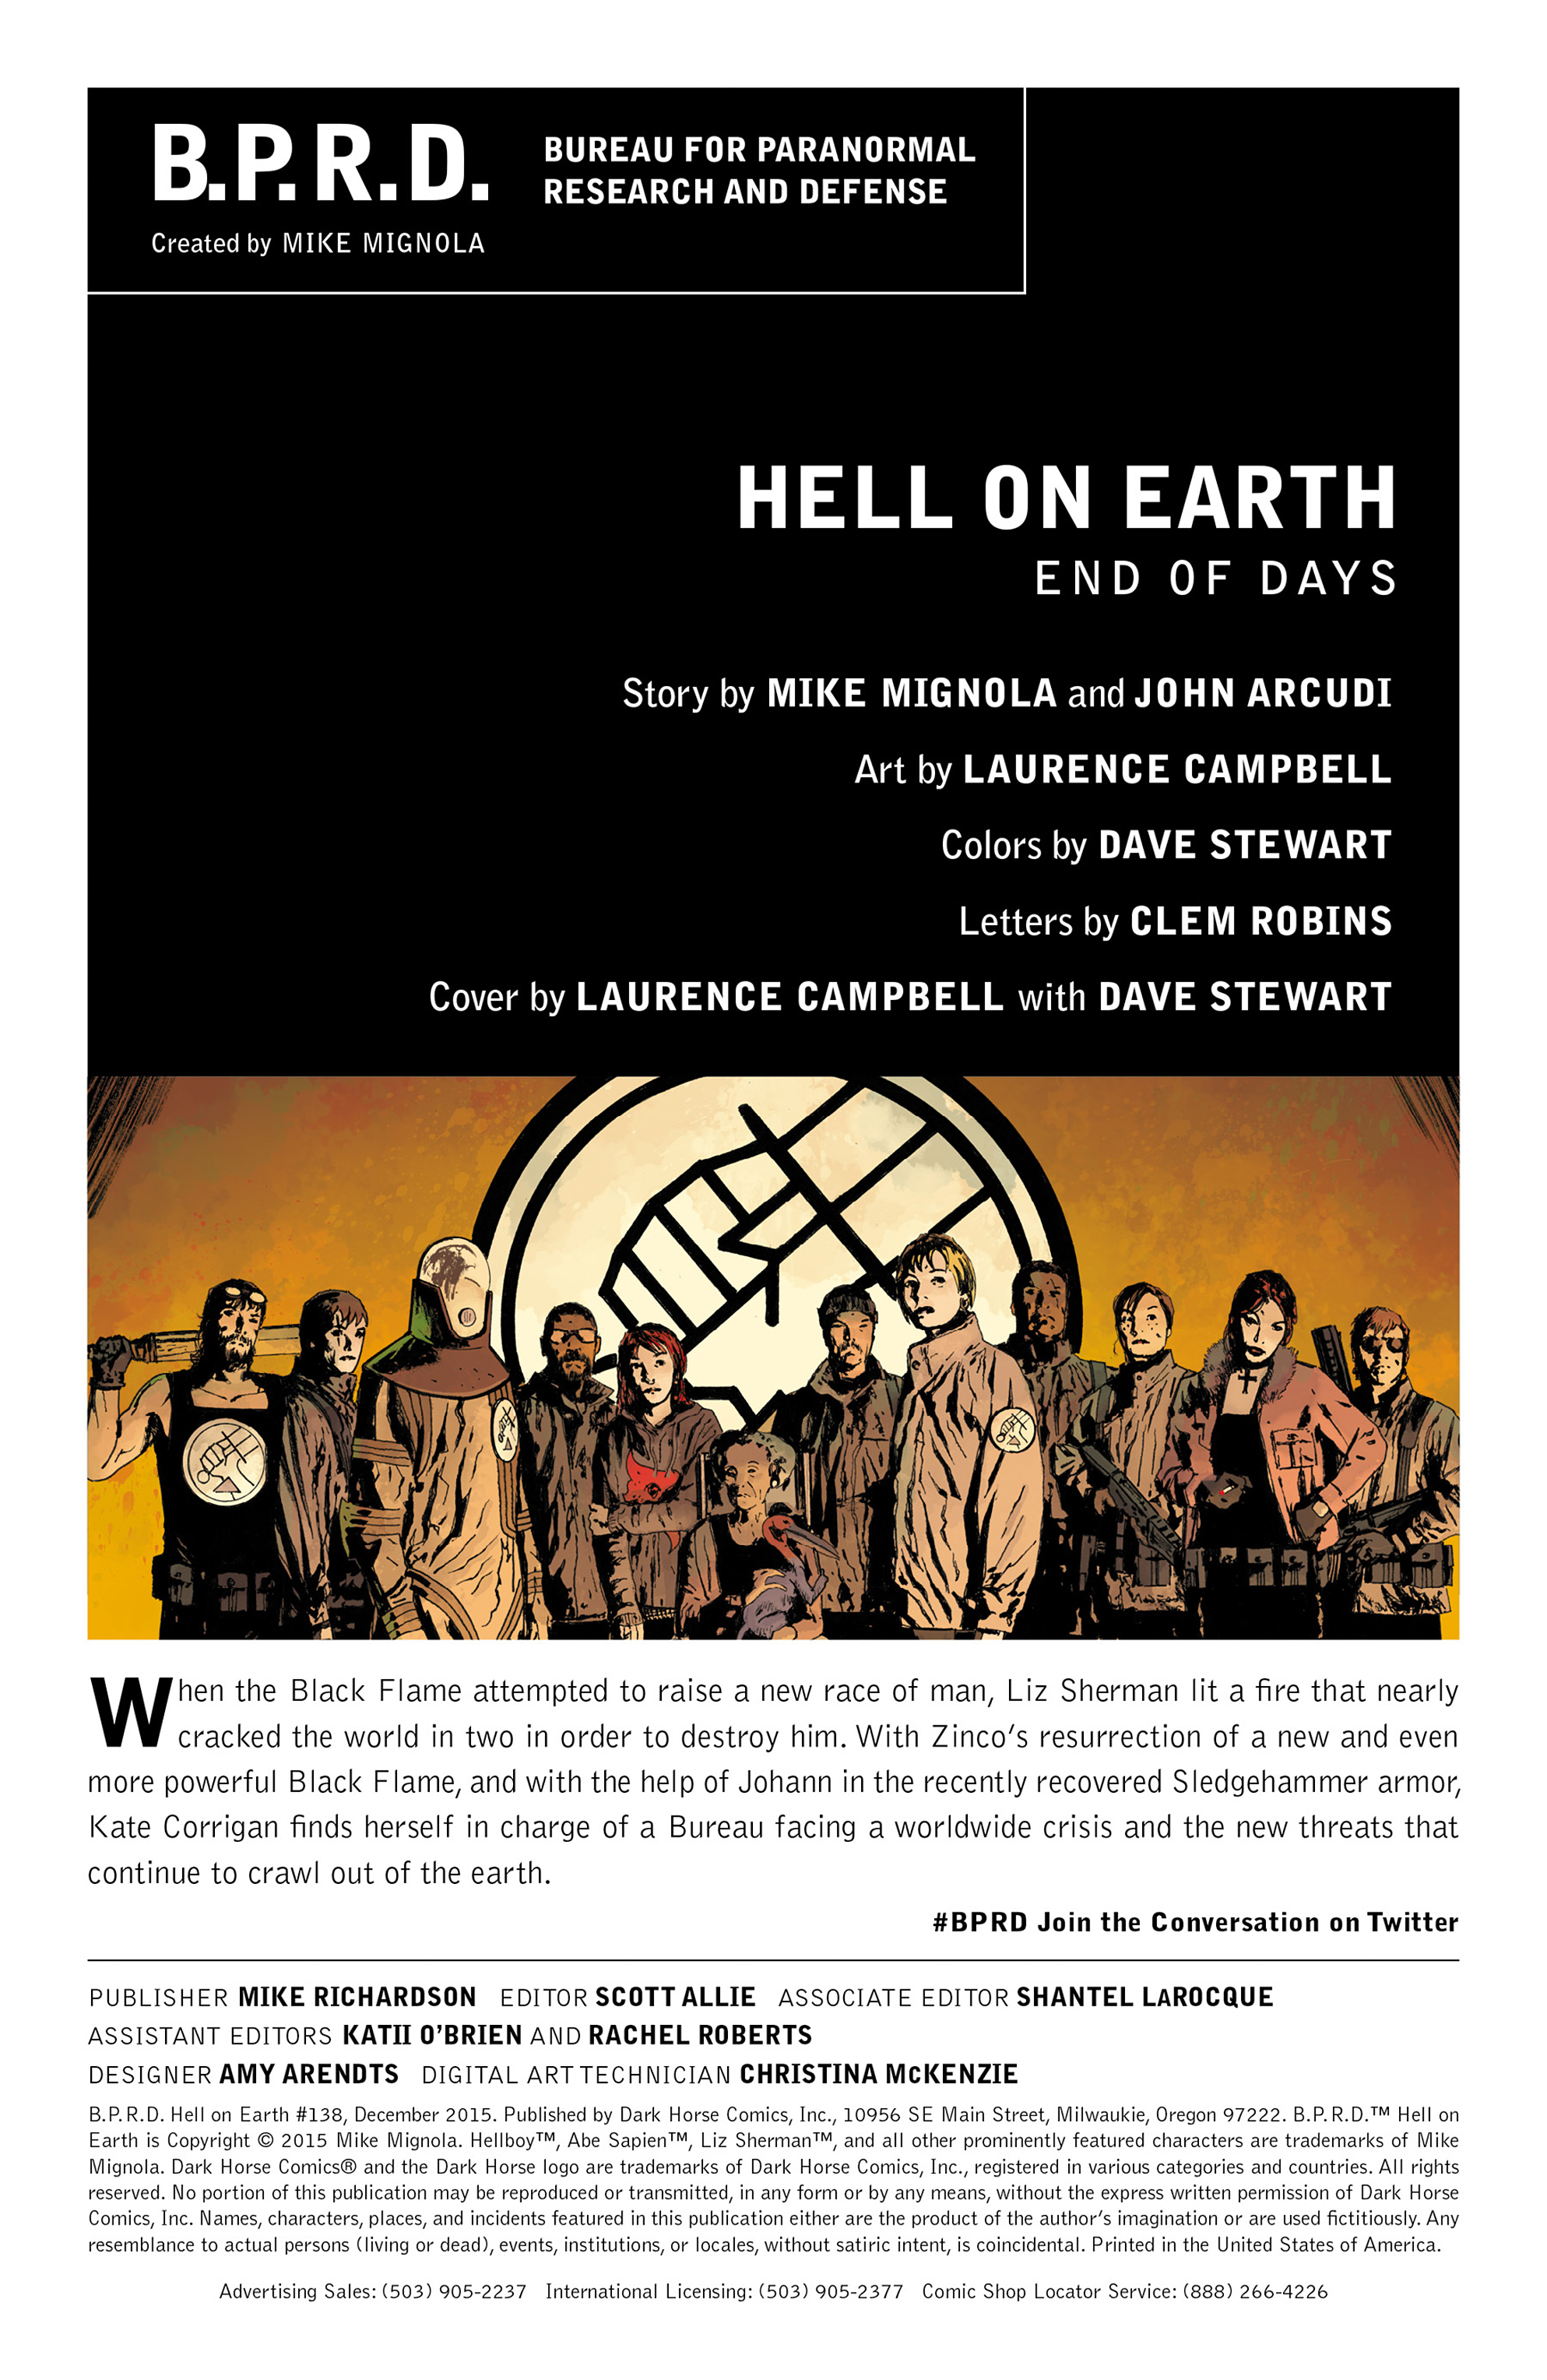 Read online B.P.R.D. Hell on Earth comic -  Issue #138 - 2